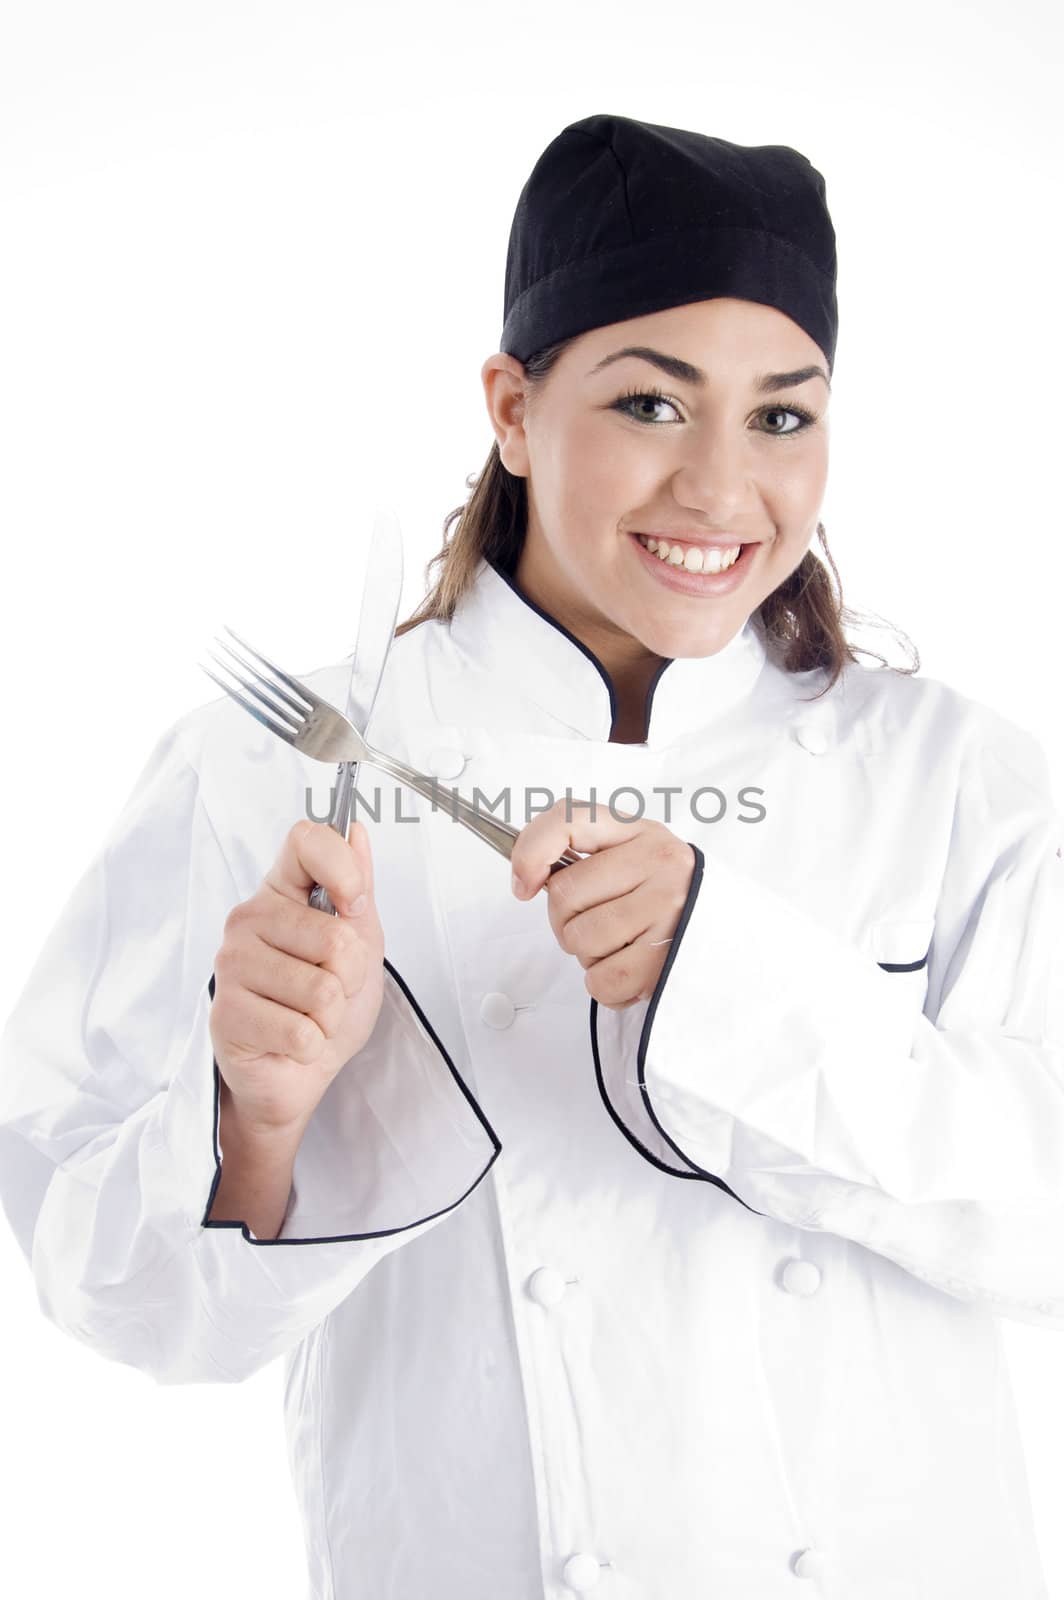 young chef holding metal cutlery by imagerymajestic